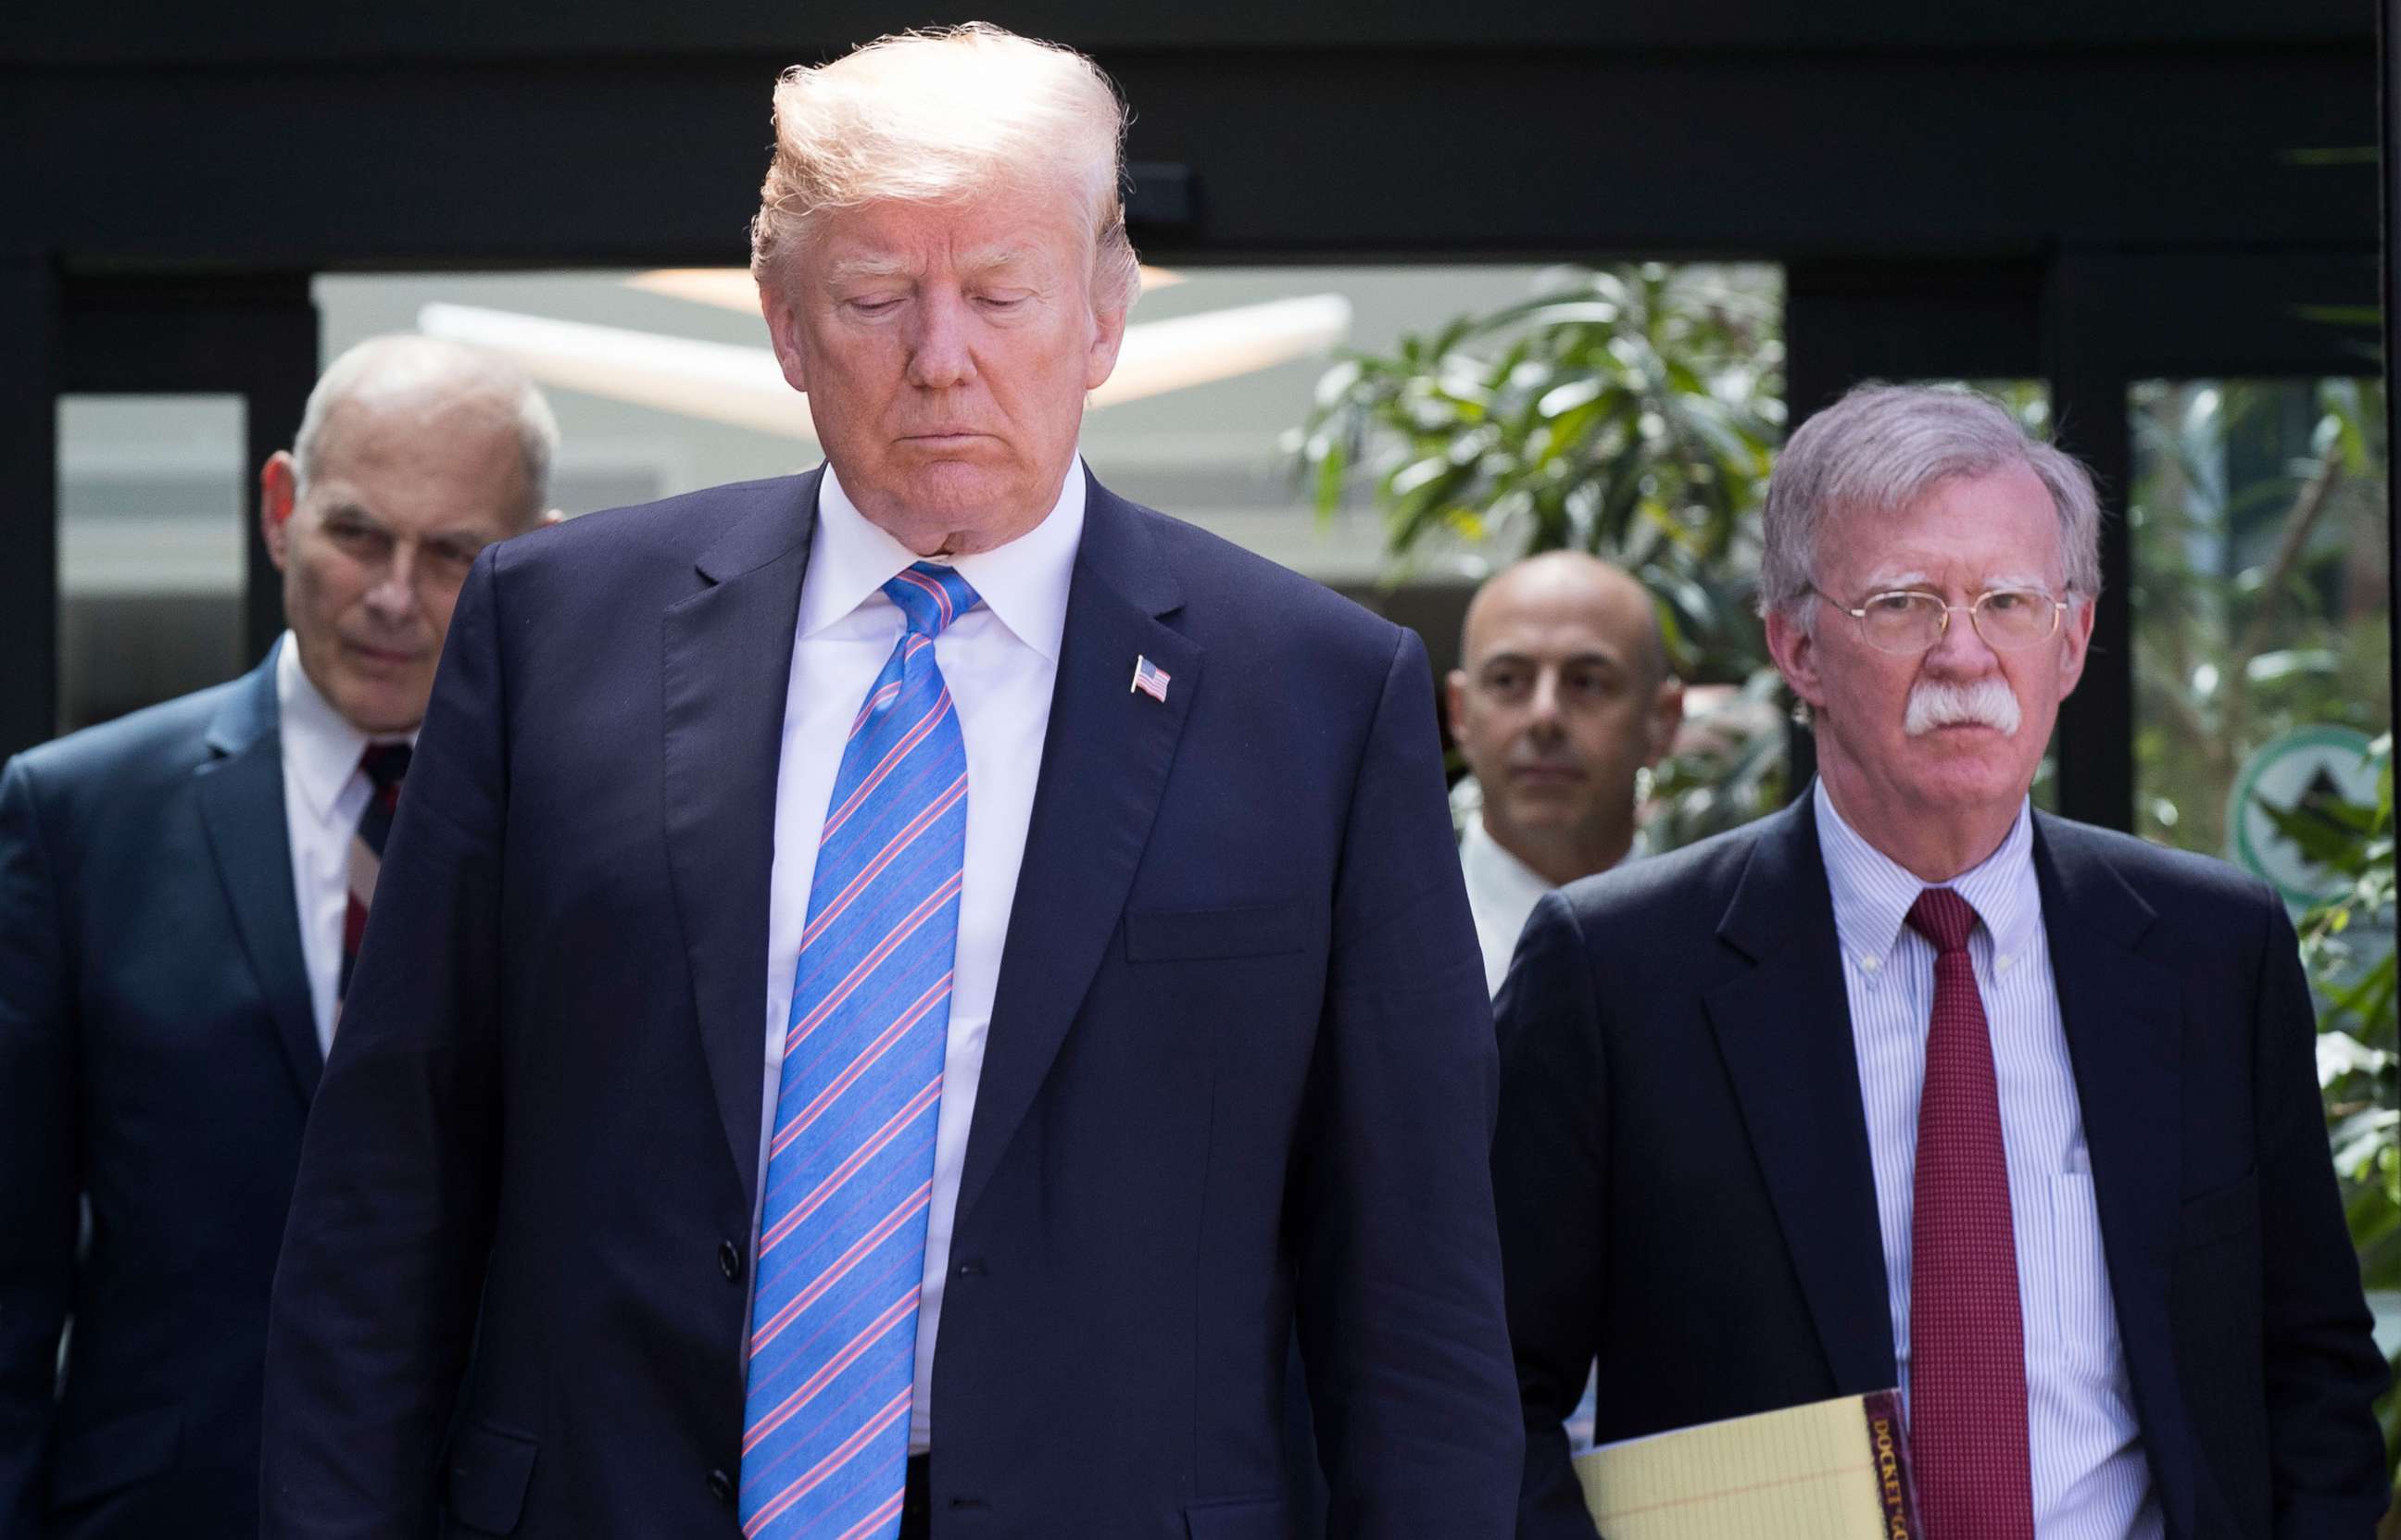 PHOTO: In this June 9, 2018, file photo, President Donald Trump, with National Security Advisor John Bolton (R) and White House Chief of Staff John Kelly (L), leaves the G7 summit in La Malbaie, Quebec.